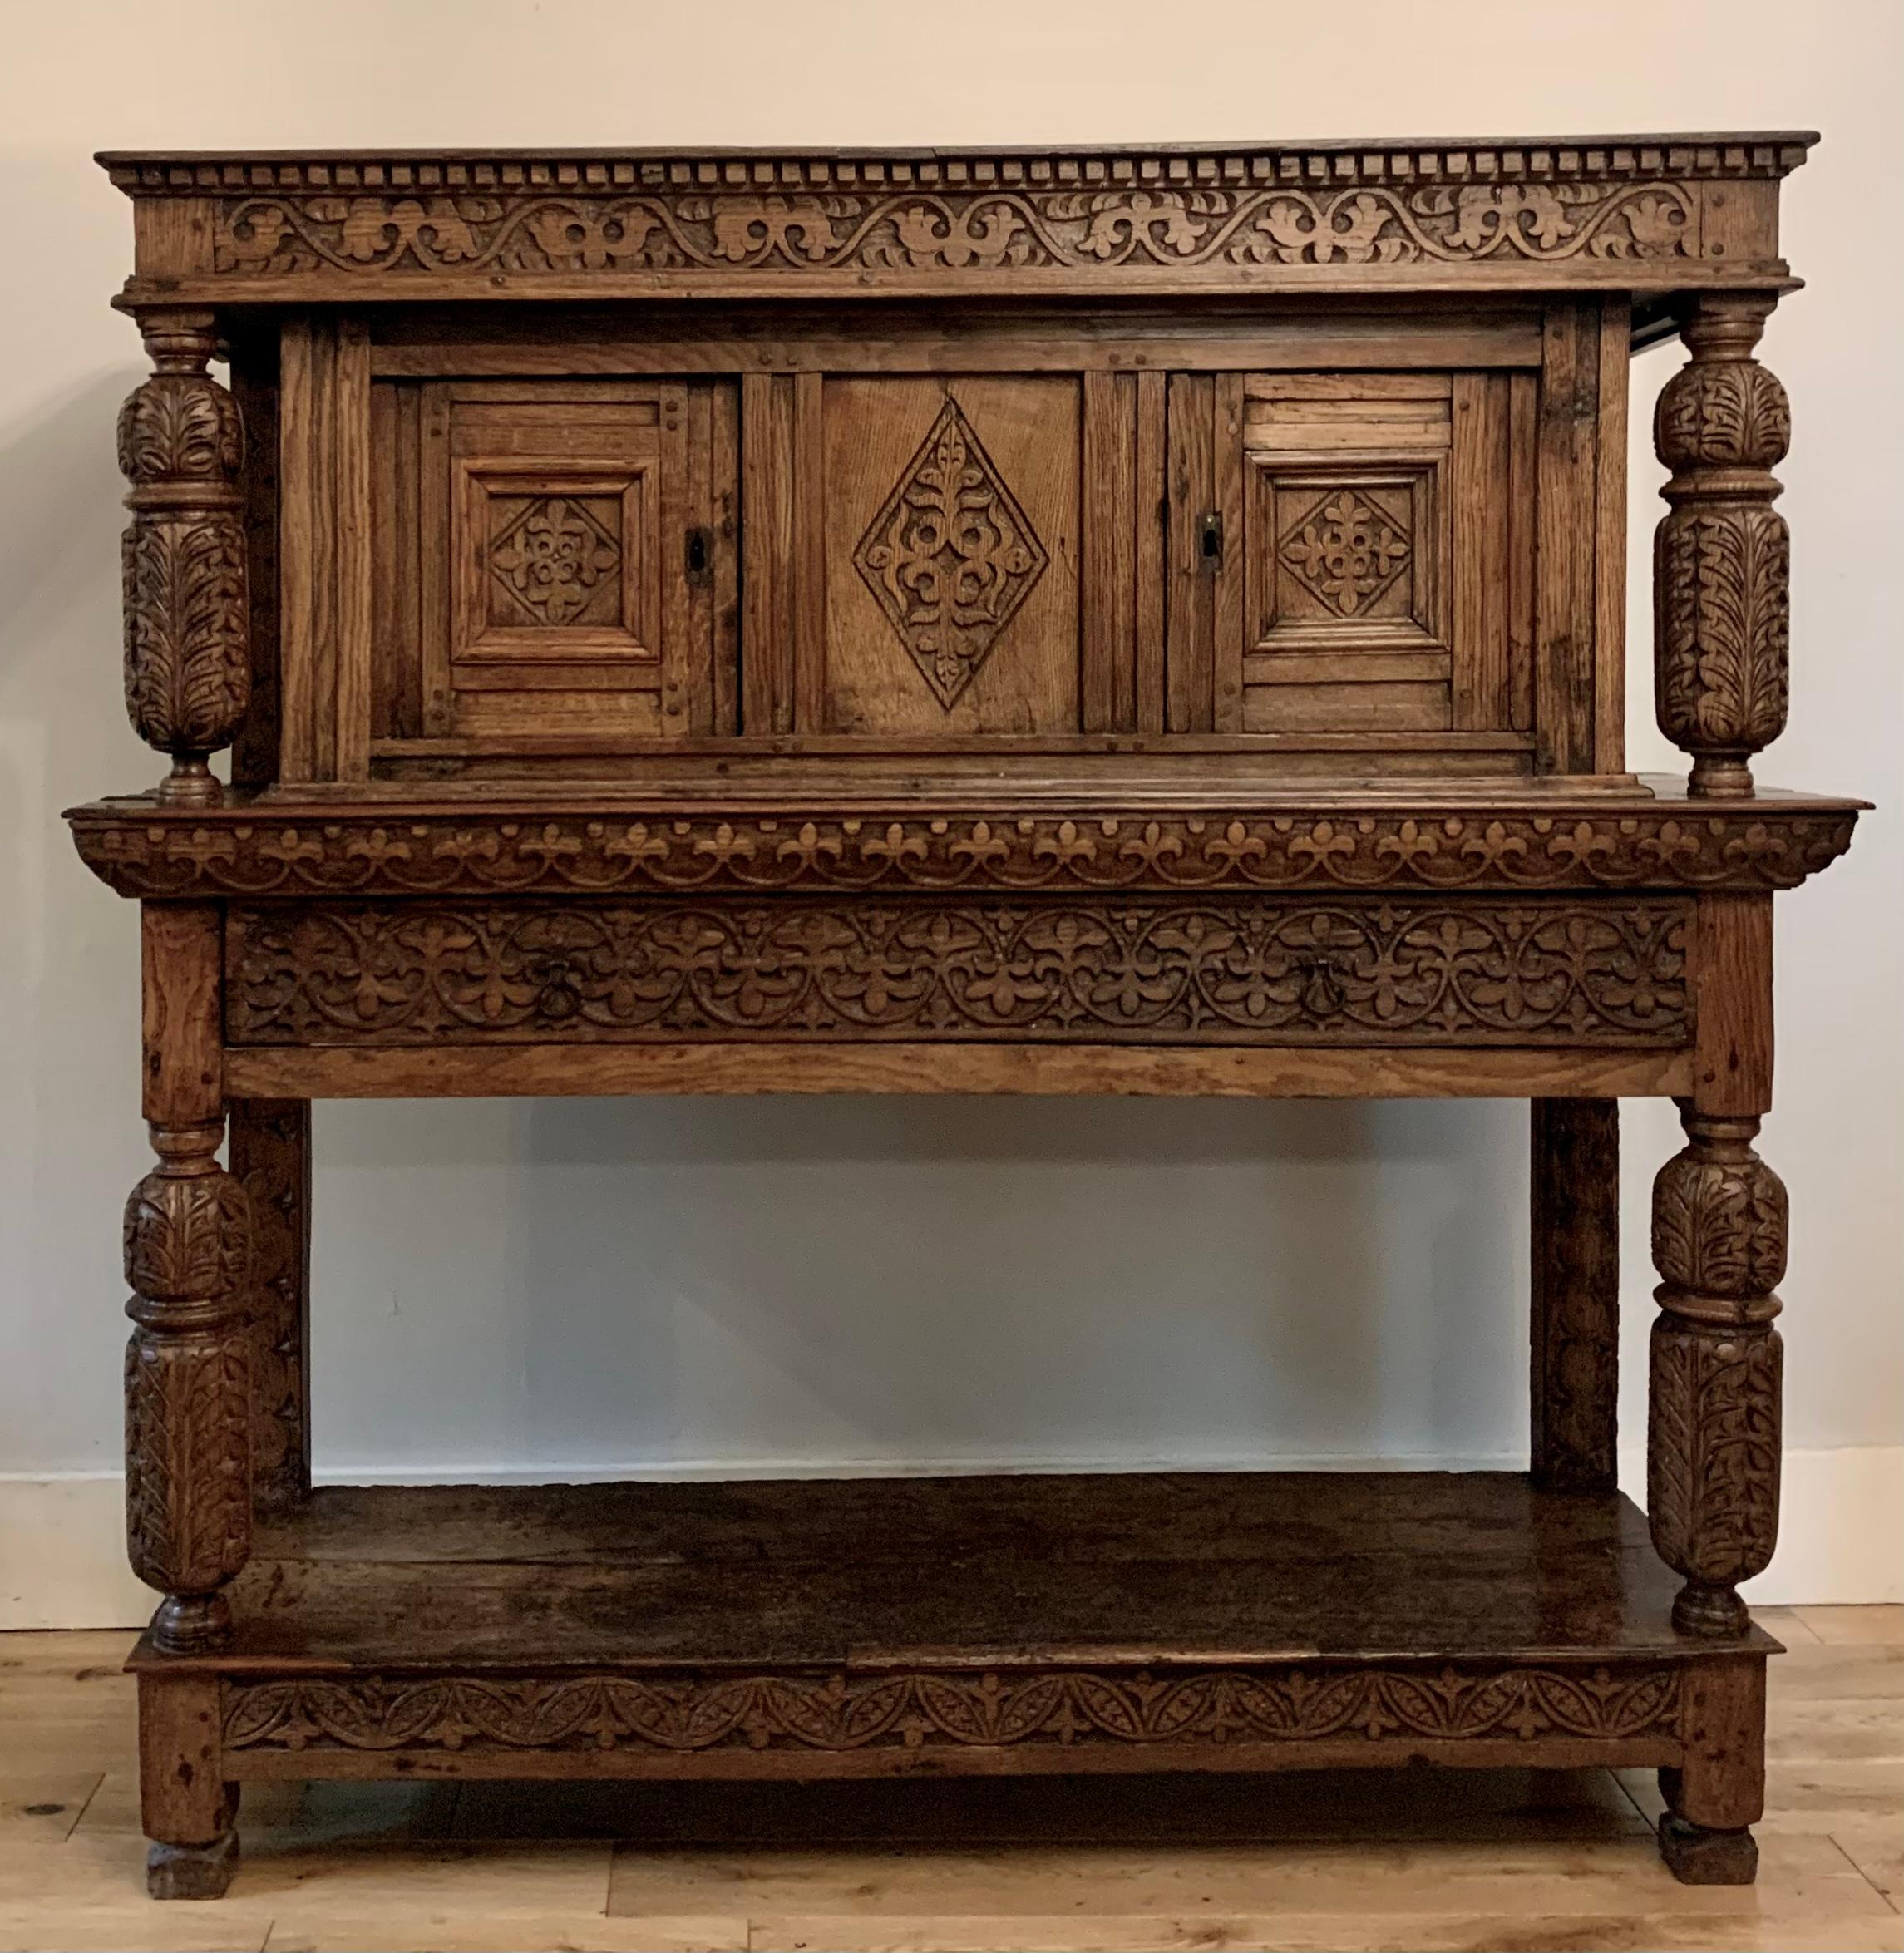 A rare Elizabethan Joined Oak Livery Cupboard , dating to the late 16th century , small proportions and of historical interest , carved with the Fleur-De-Lis . 

Wonderful colour and patina built up over a period of more than 400 years  , slightly